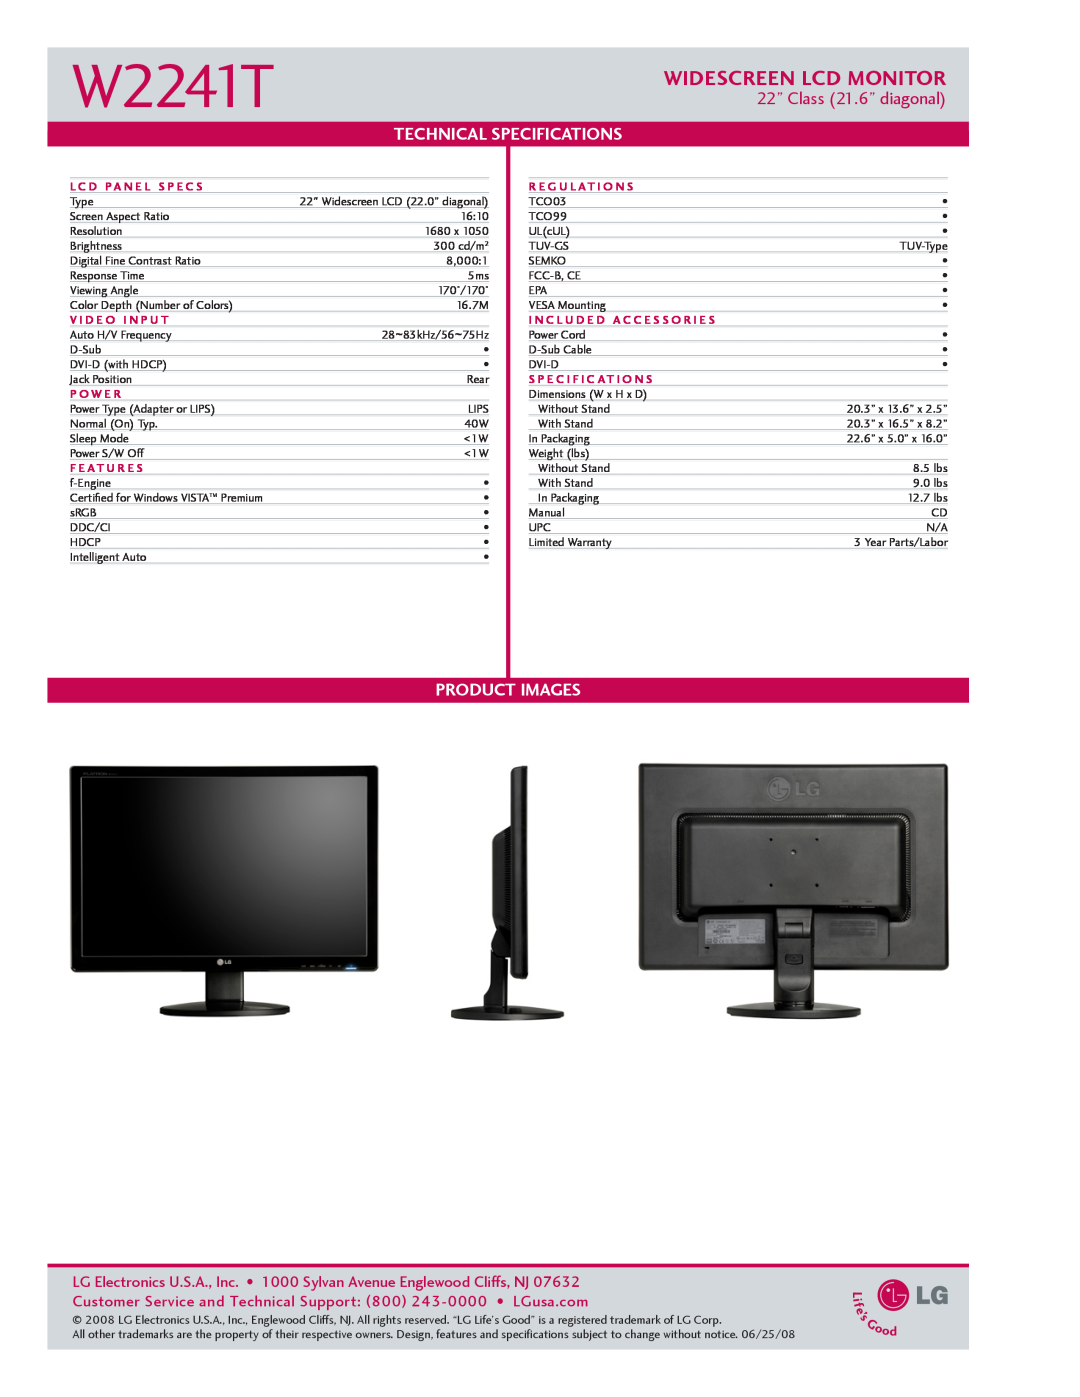 LG Electronics W2241T manual Widescreen LCD Monitor, 22” Class 21.6” diagonal, Technical specifications, Product Images 